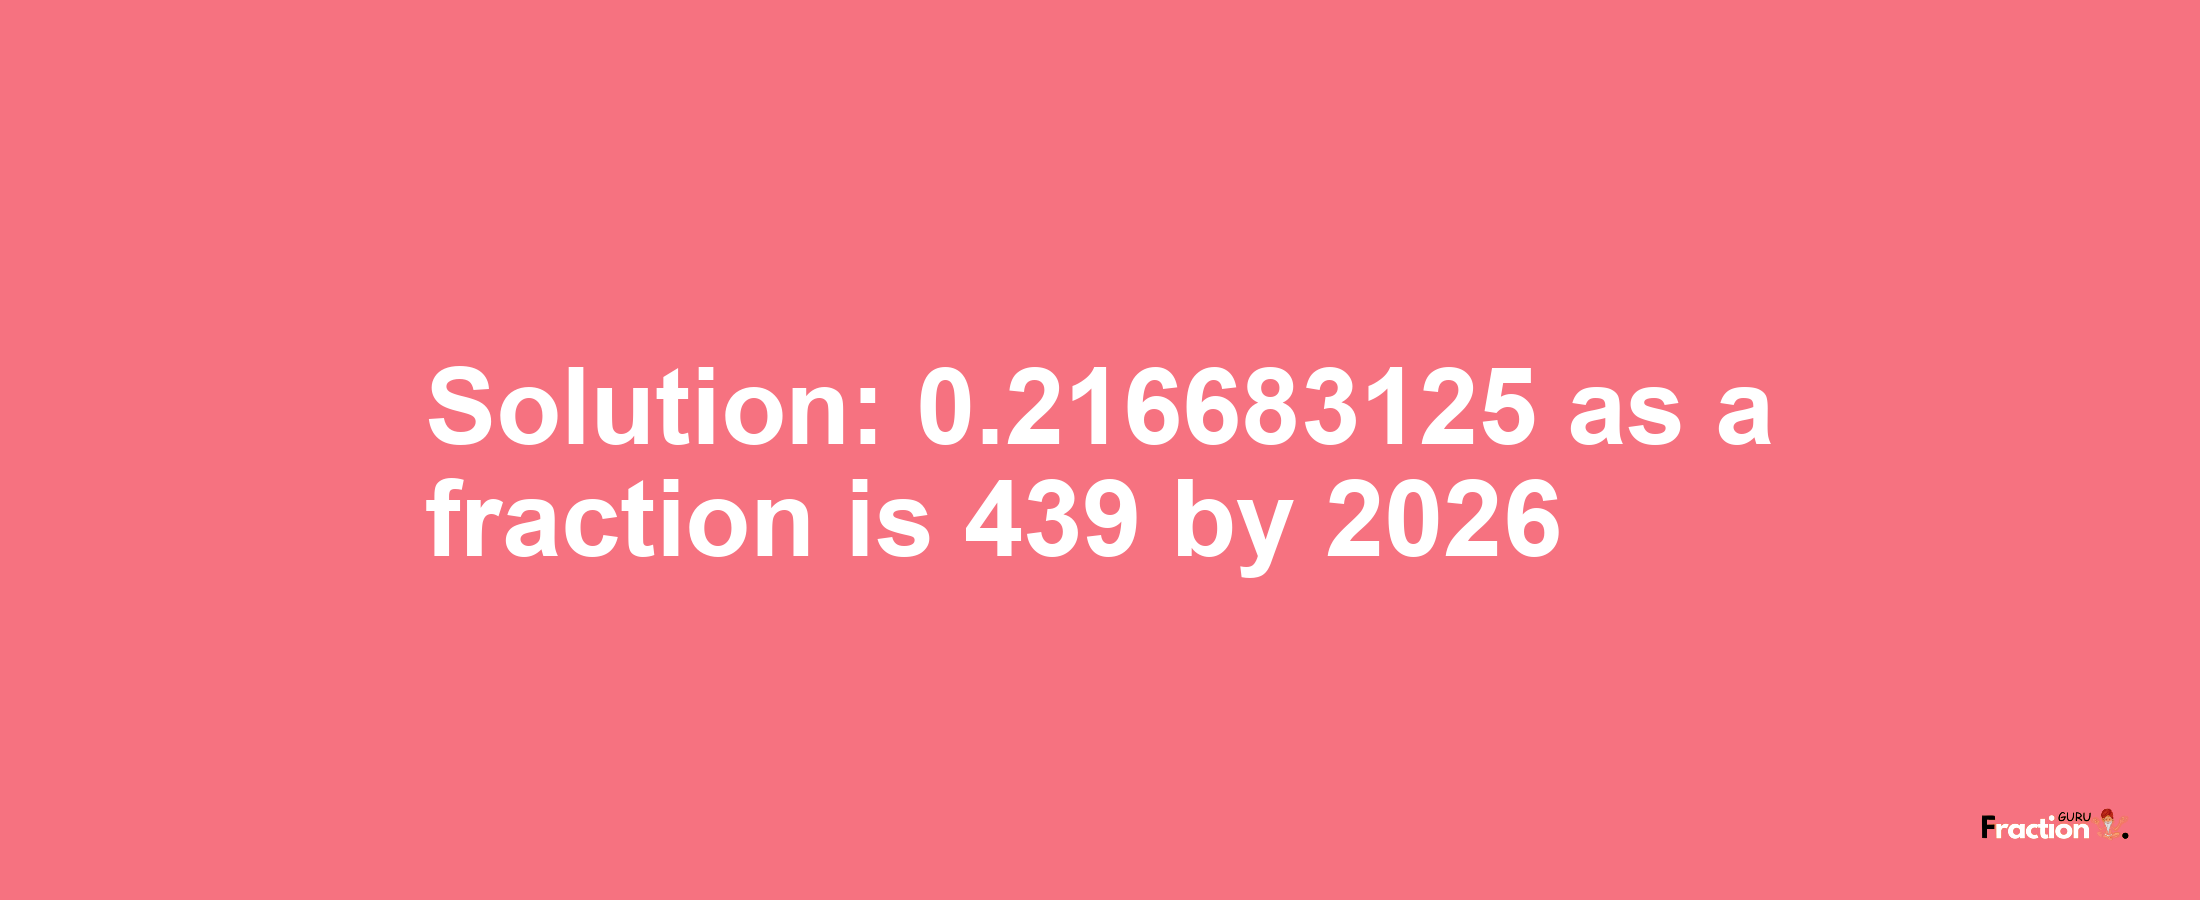 Solution:0.216683125 as a fraction is 439/2026